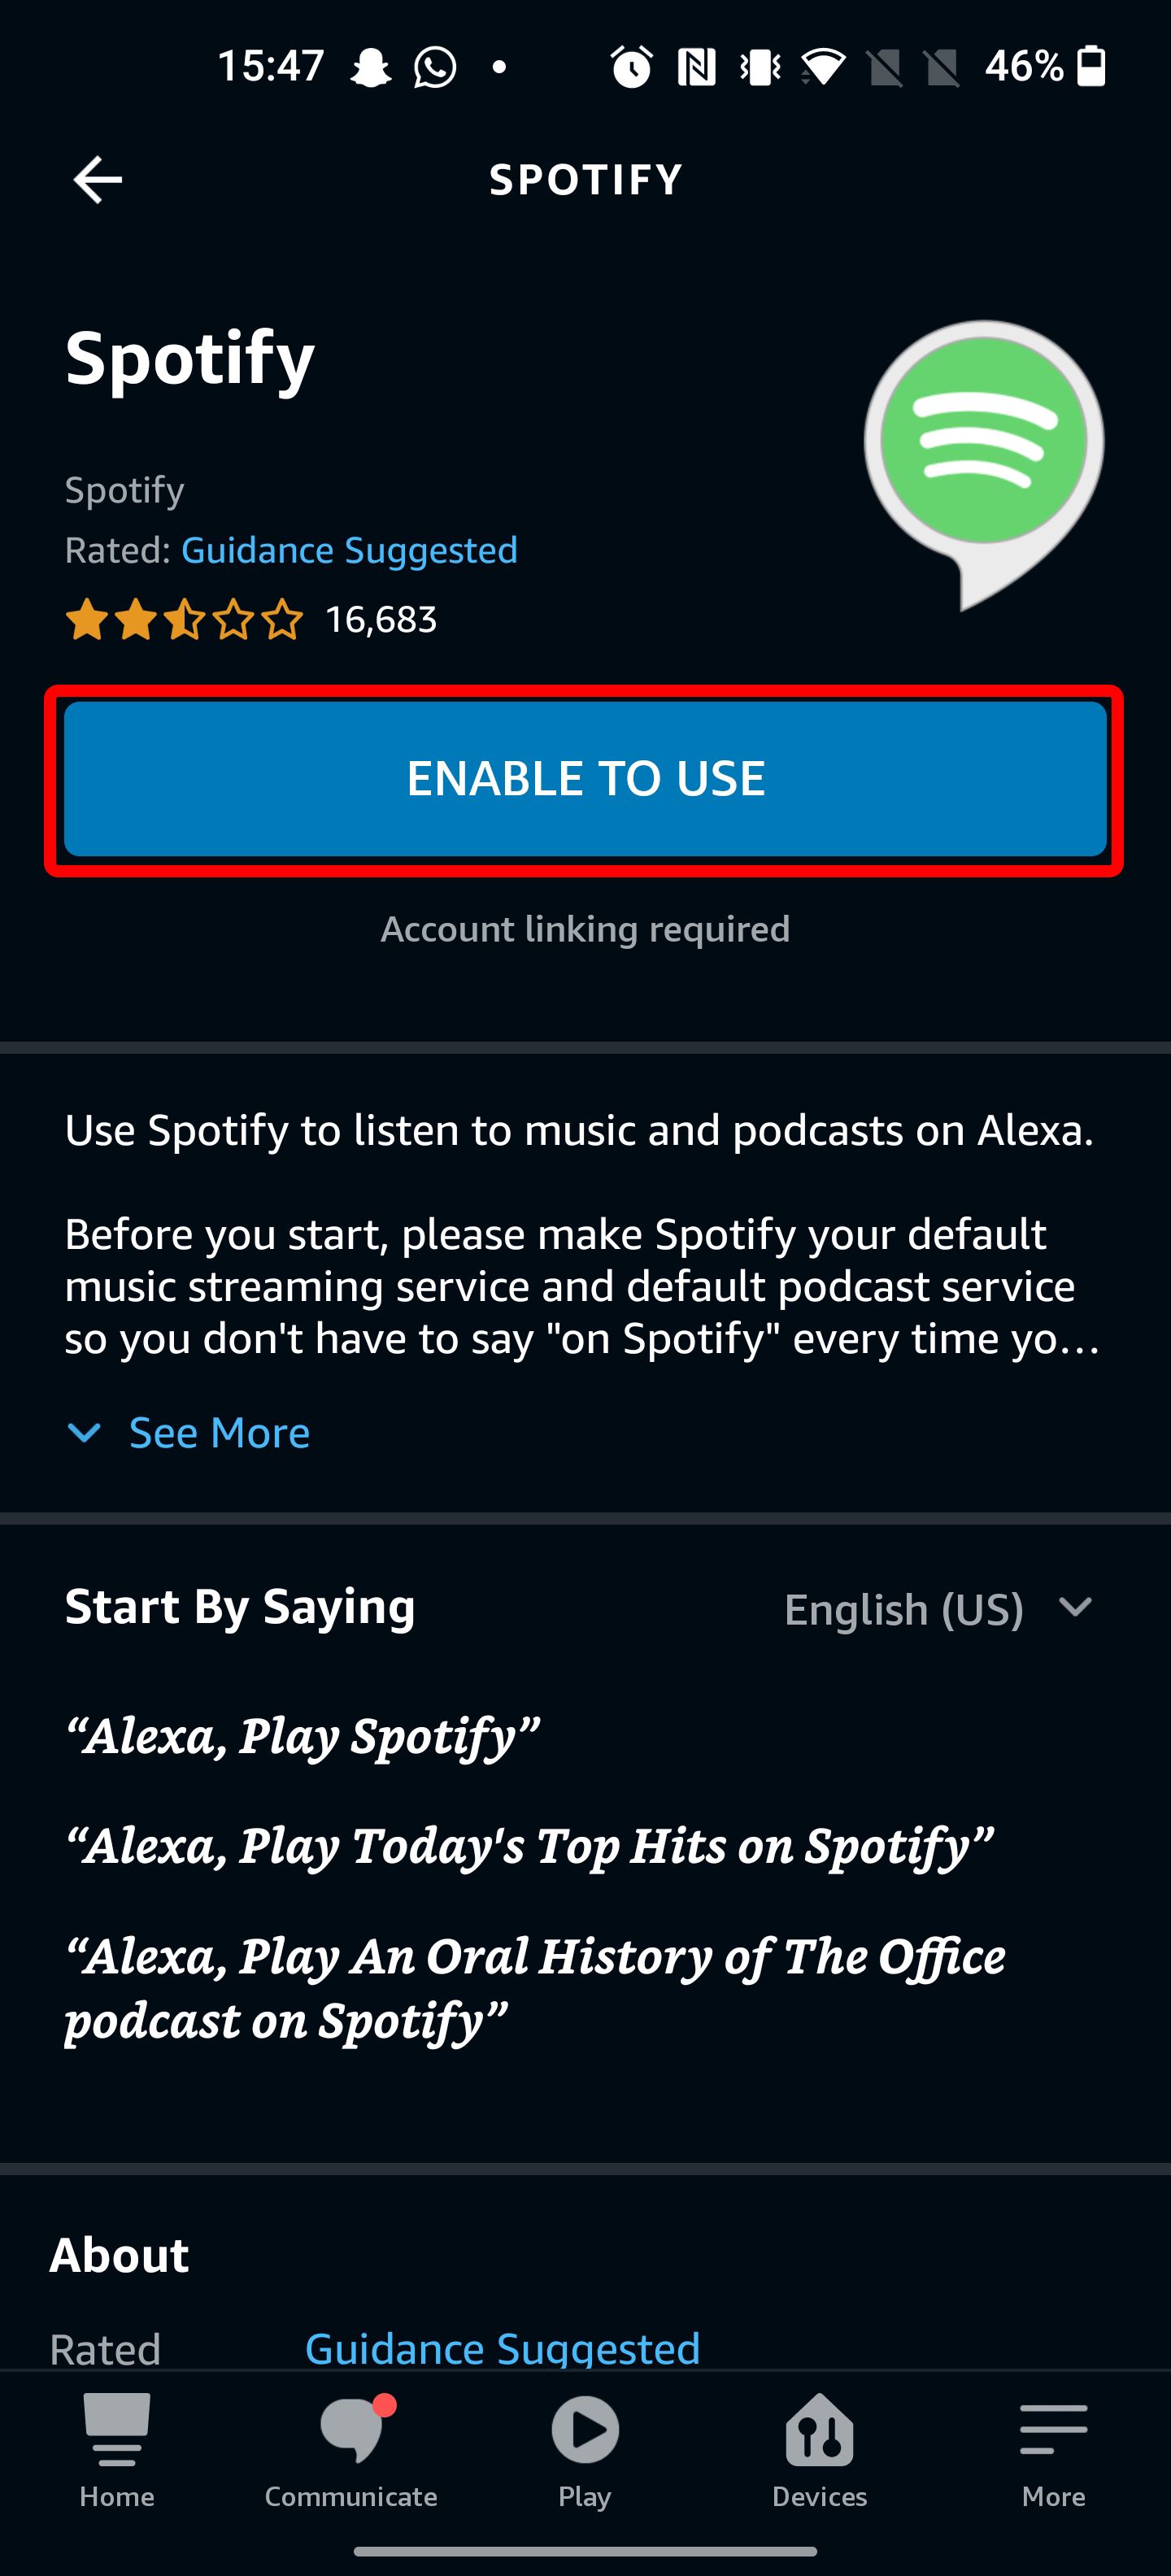 The Spotify enable to use page on the Amazon Alexa app's Music section.